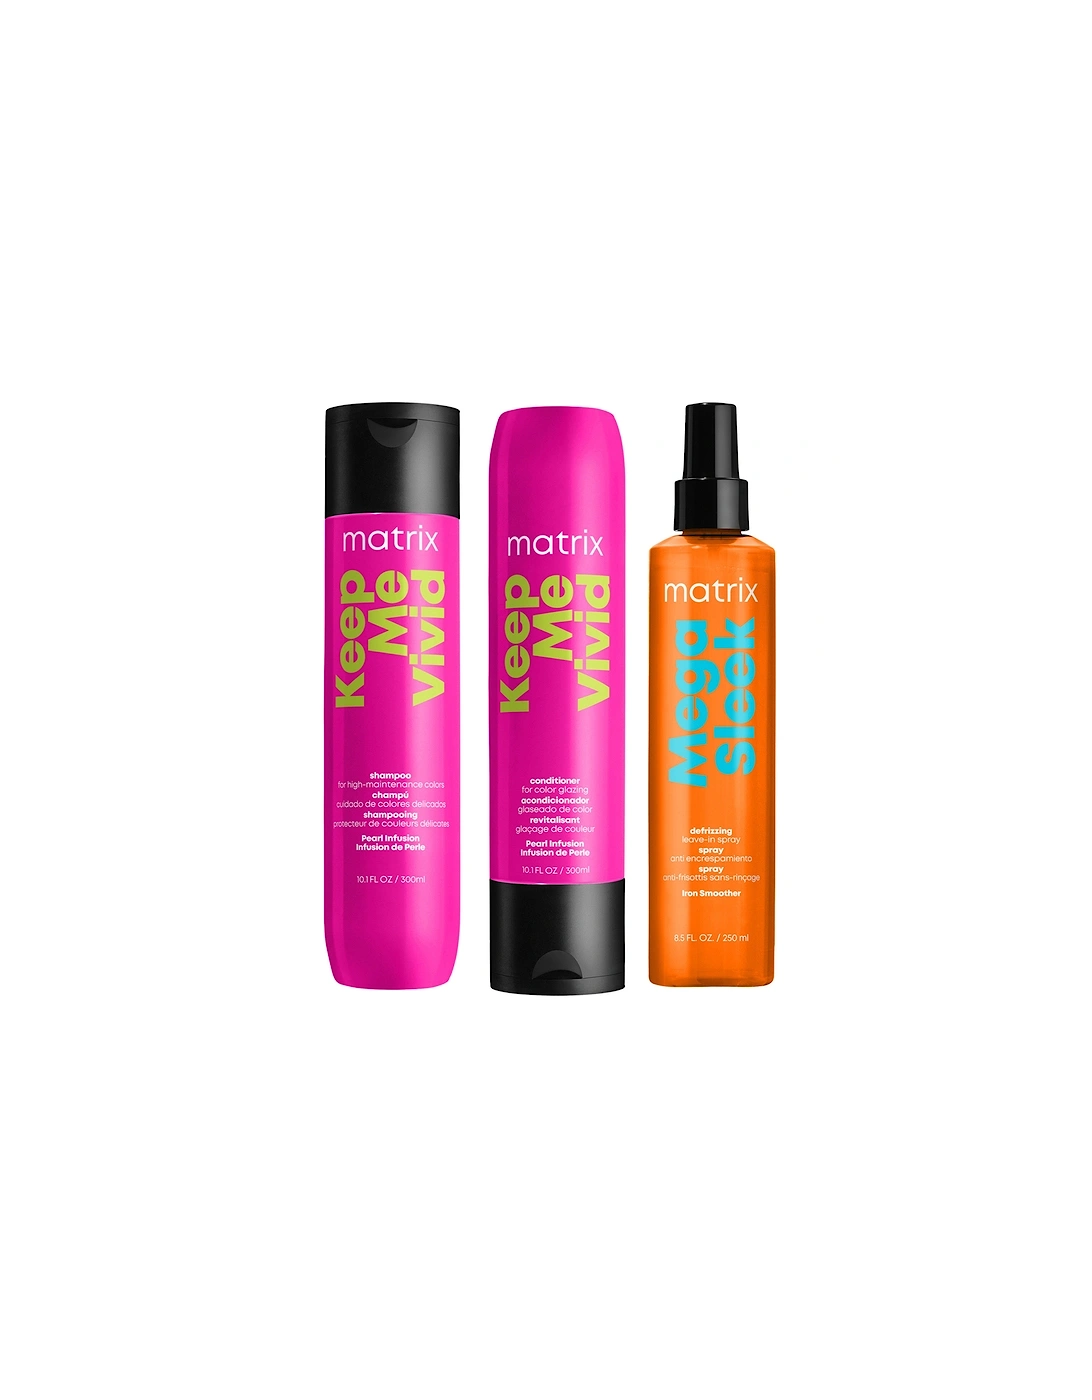 Keep Me Vivid Colour Protecting Shampoo and Conditioner For Coloured Hair + Anti-Frizz Mega Sleek Iron Smoother Bundle, 2 of 1